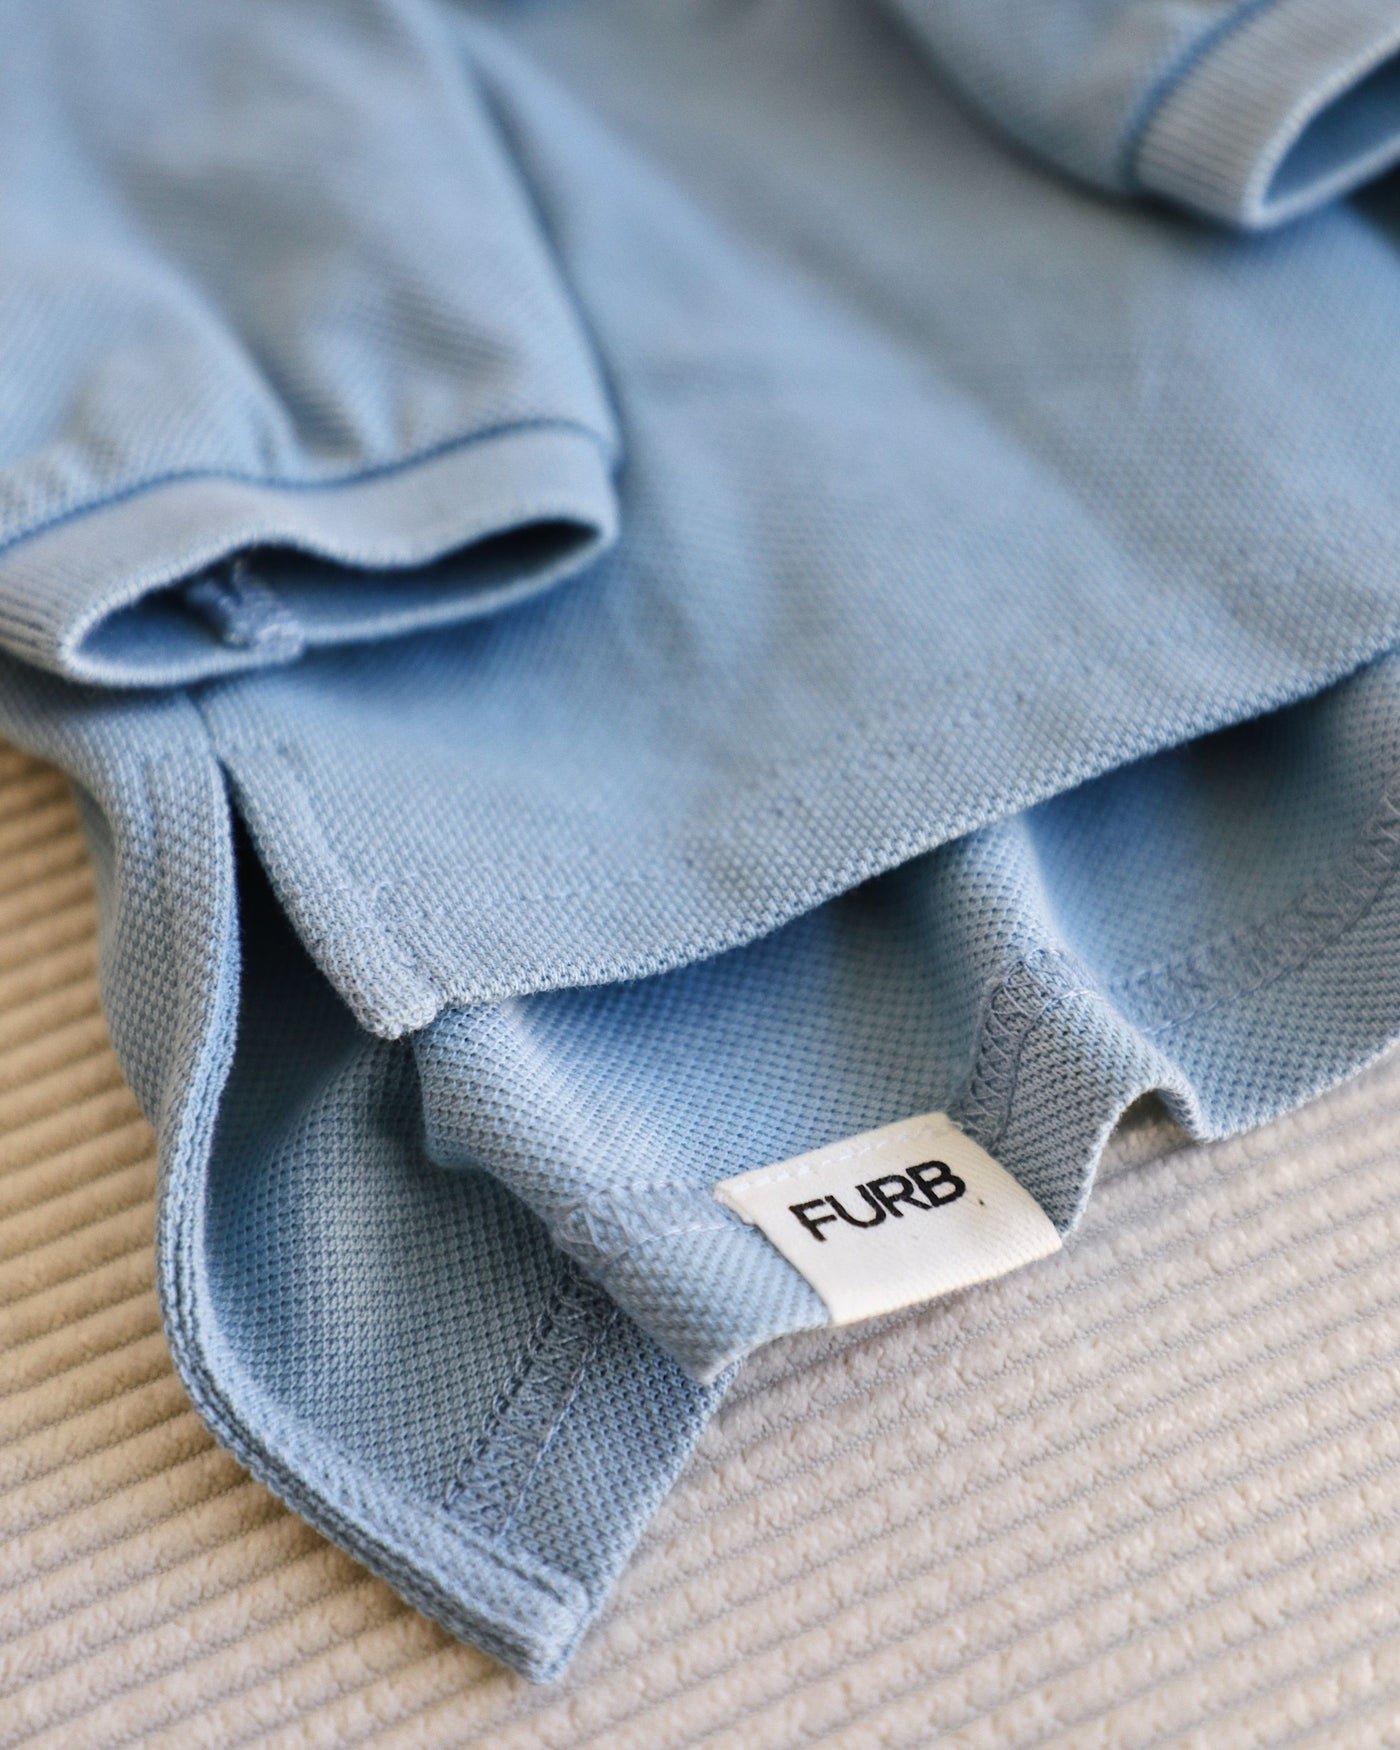 close up shot of FURB tag on baby blue dog polo